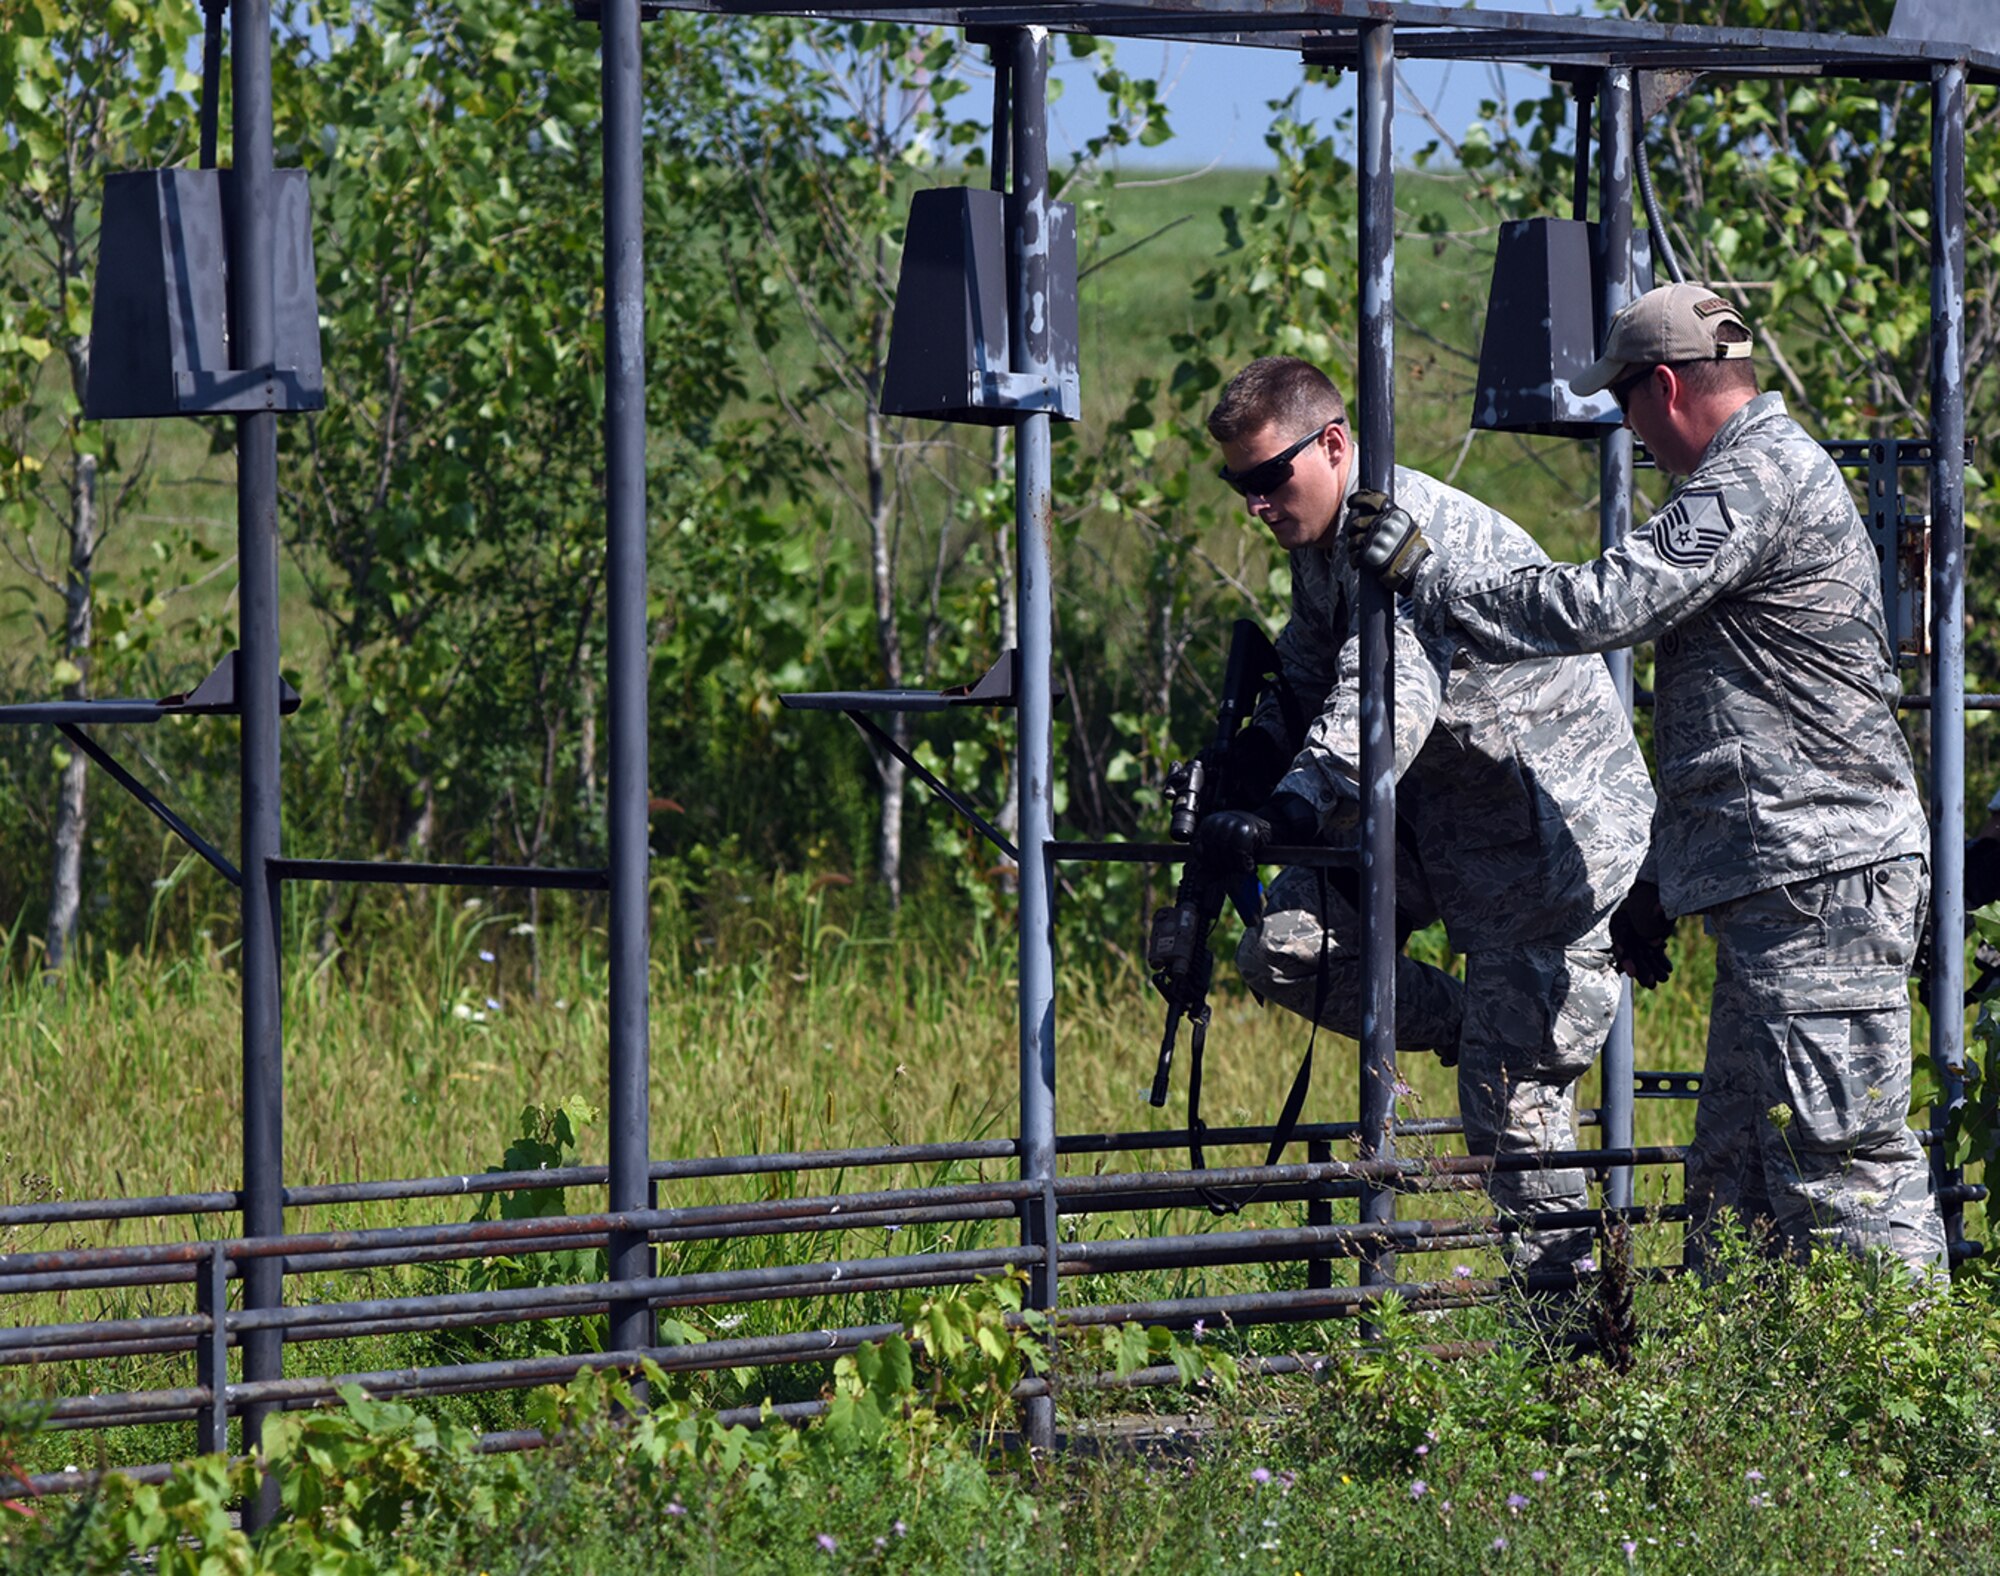 Senior Airman Brendan Leach, 109th Security Forces Squadron, goes through a combat combative obstacle course on Aug. 11, 2016 at Stratton Air National Guard Base, New York. The course was part of a weeklong pre-deployment training Warrior Week for Security Forces Airmen here. (U.S. Air National Guard photo by Master Sgt. William Gizara/Released)